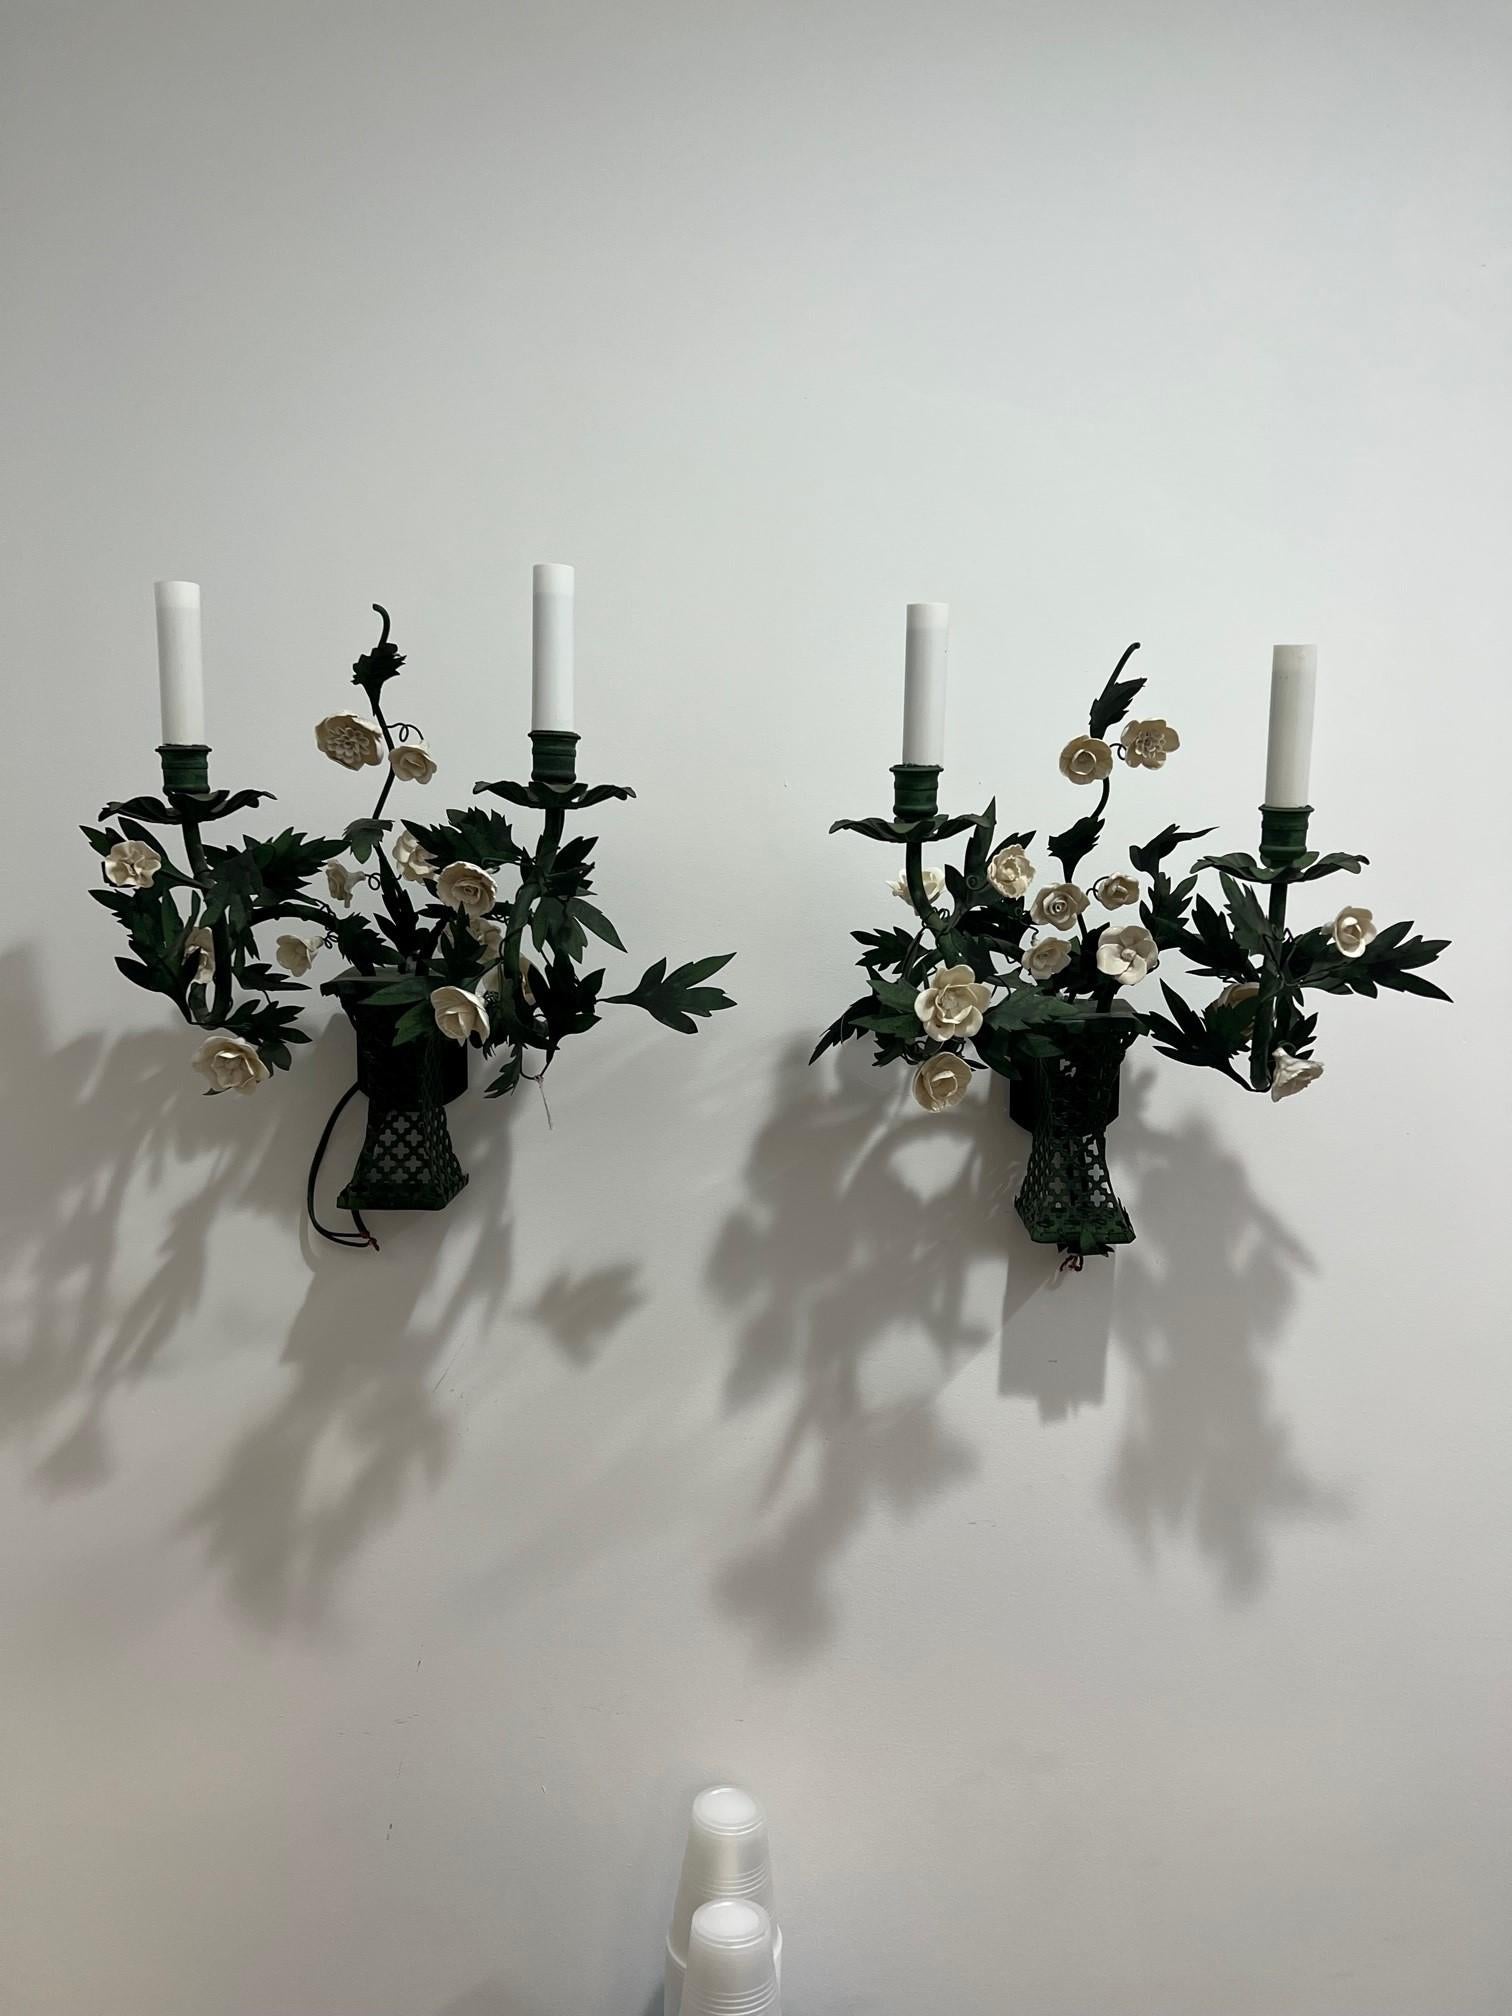 A nice pair of wall sconces with green metal leaves and white porcelain flowers handmade in France by Art el Floritude a well known manufacturer of lighting. This charming craft production will bring in your interior a little piece of nature. Each